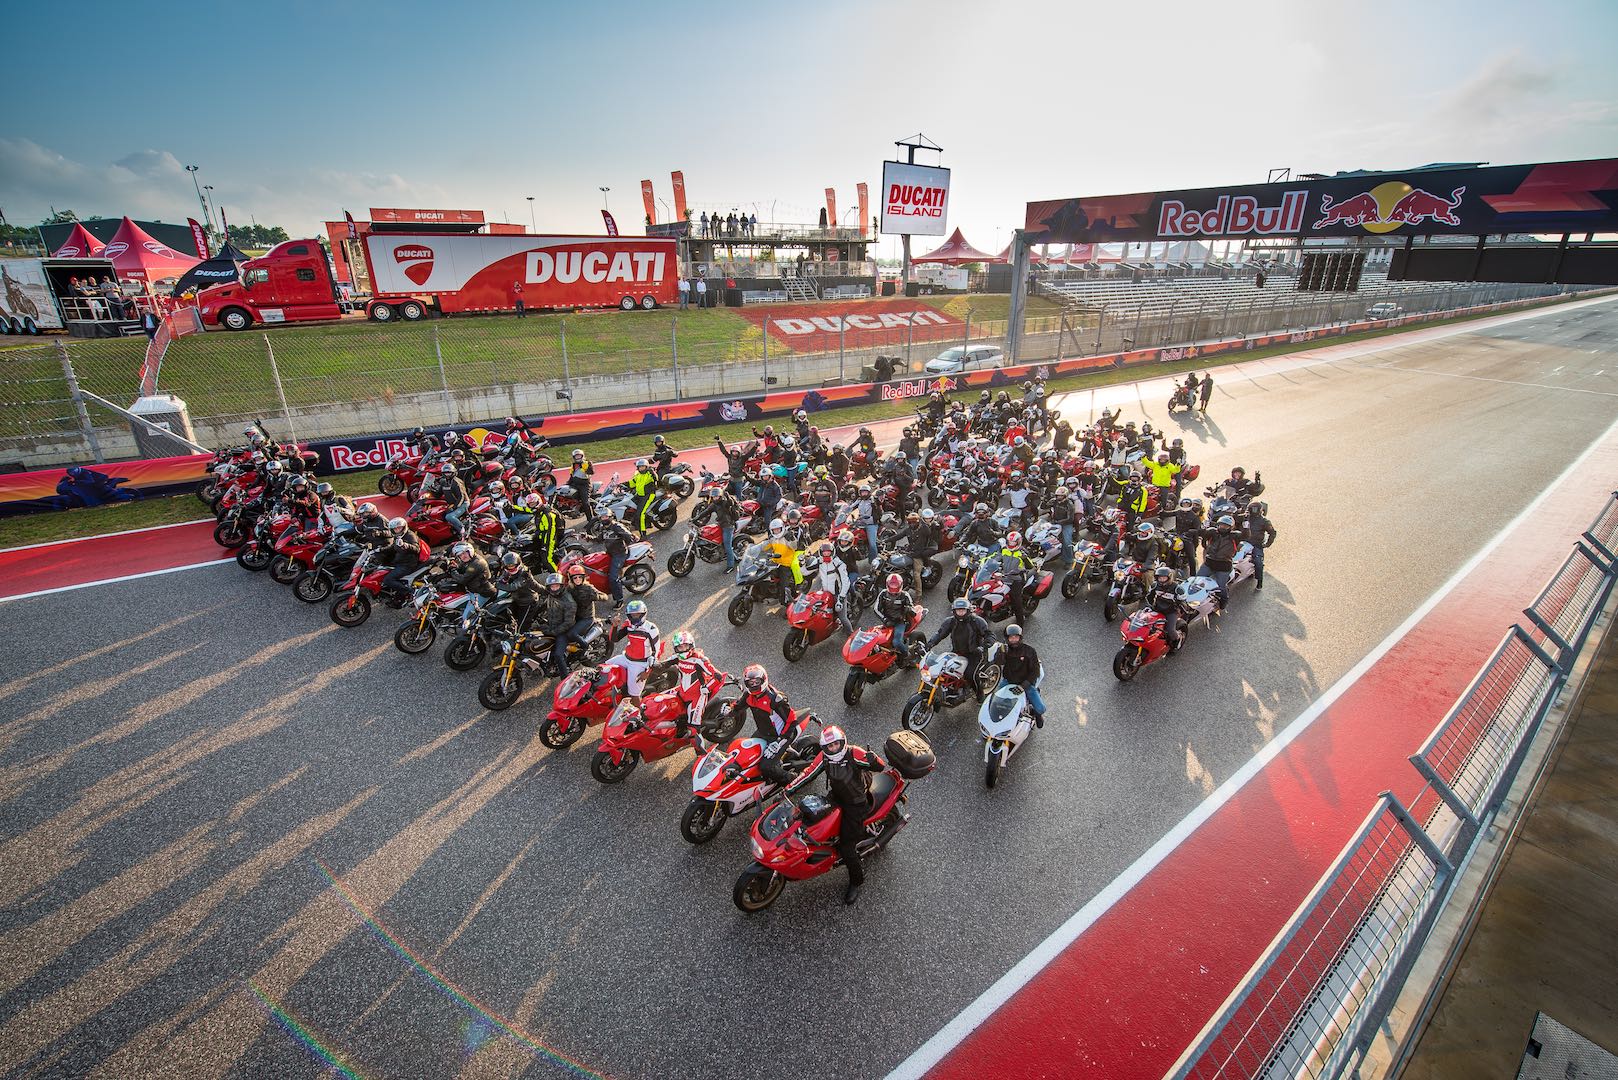 A lineup of Ducati riders at the 2019 Ducati Island Experience